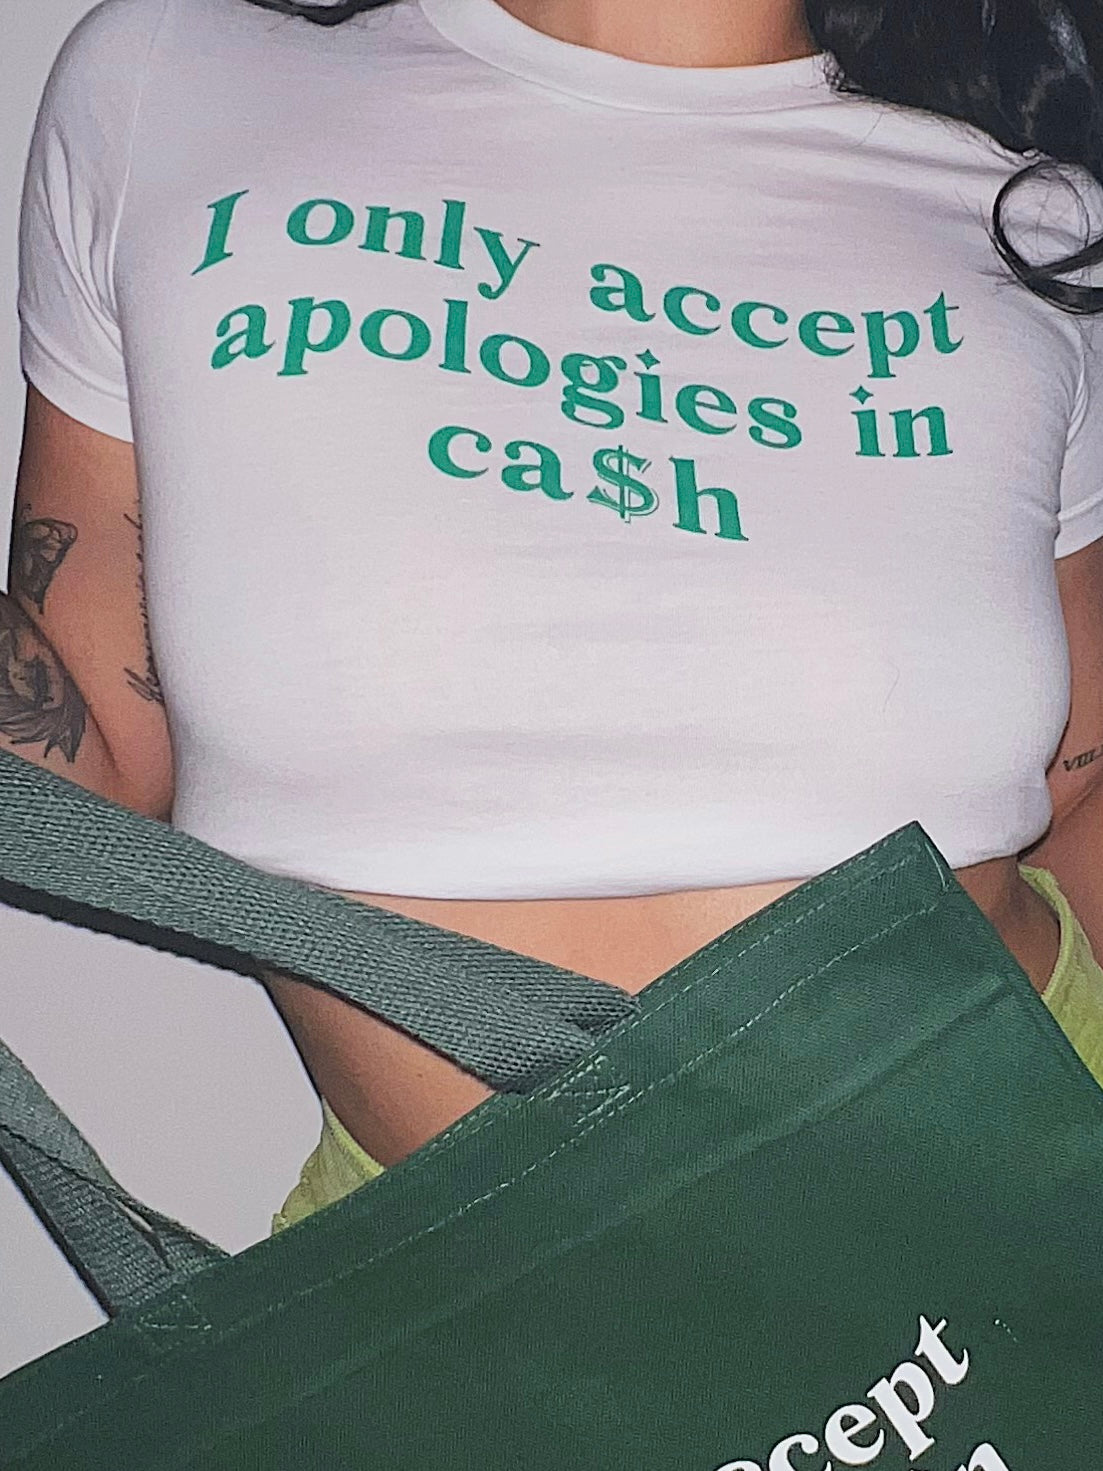 I only accept apologies in ca$h tee